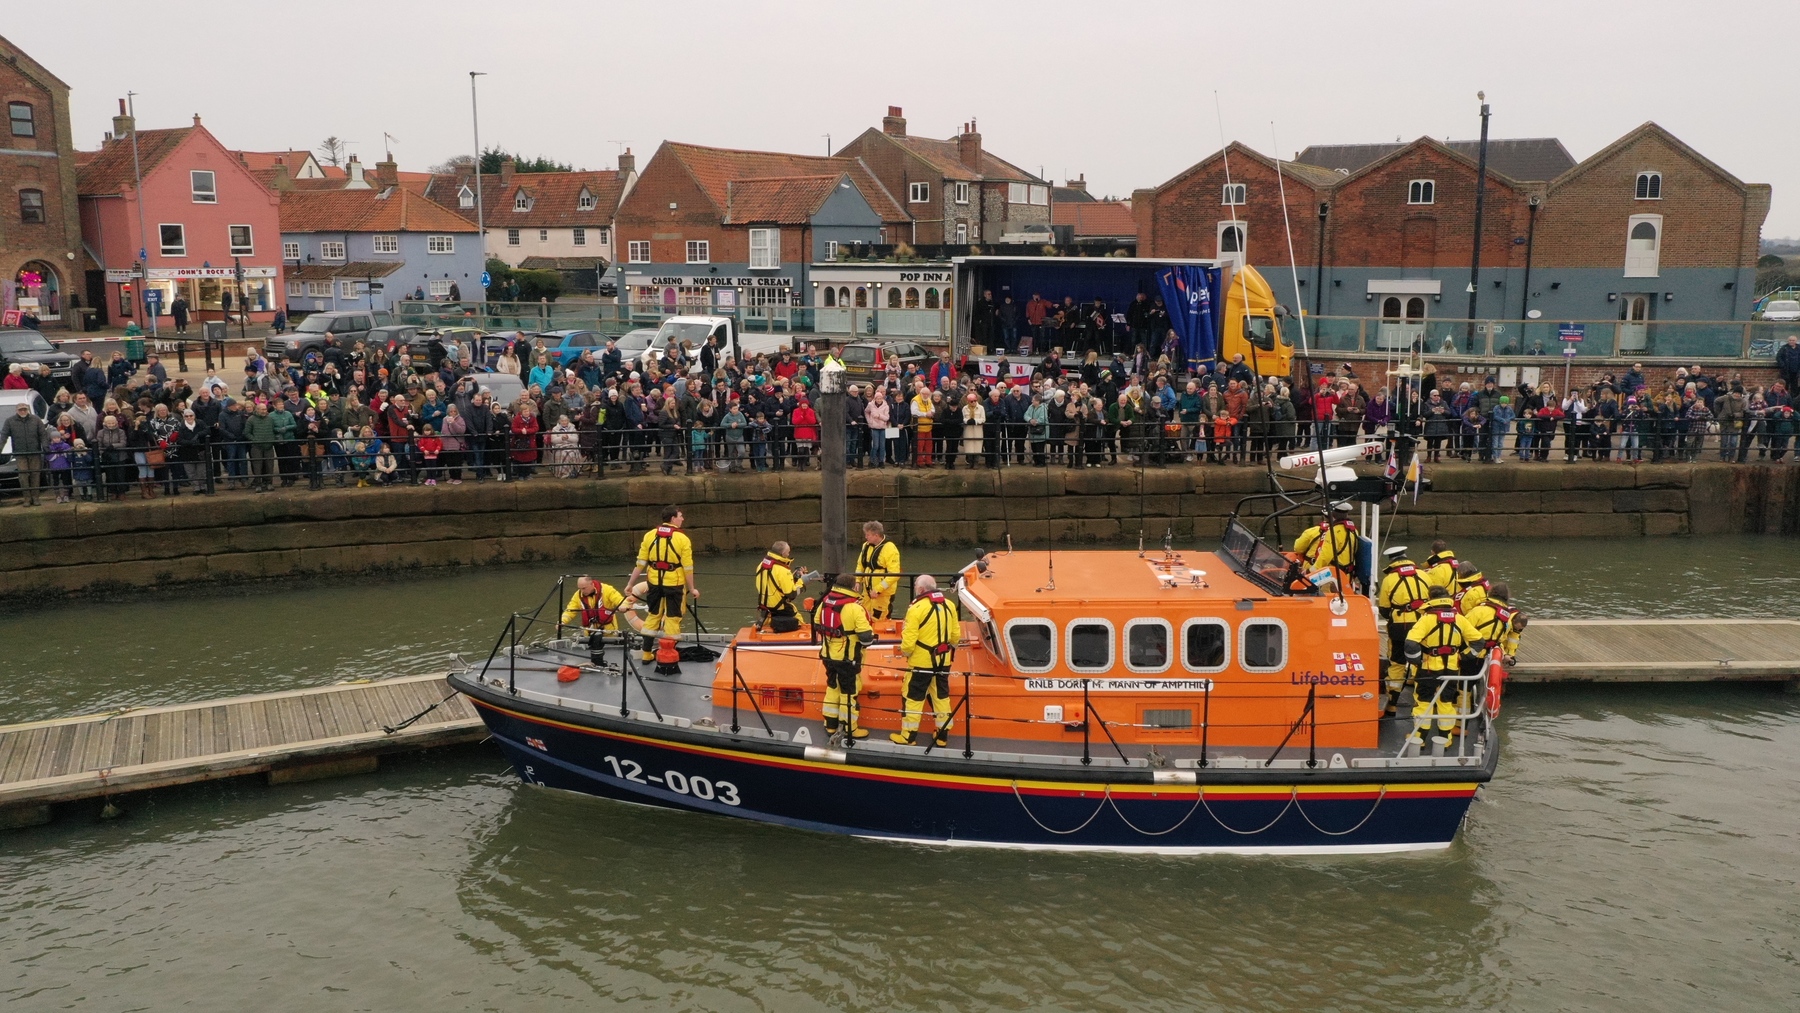 Met at the quay by a crowd of well-wishers and the Blakeney Old Wild Rovers